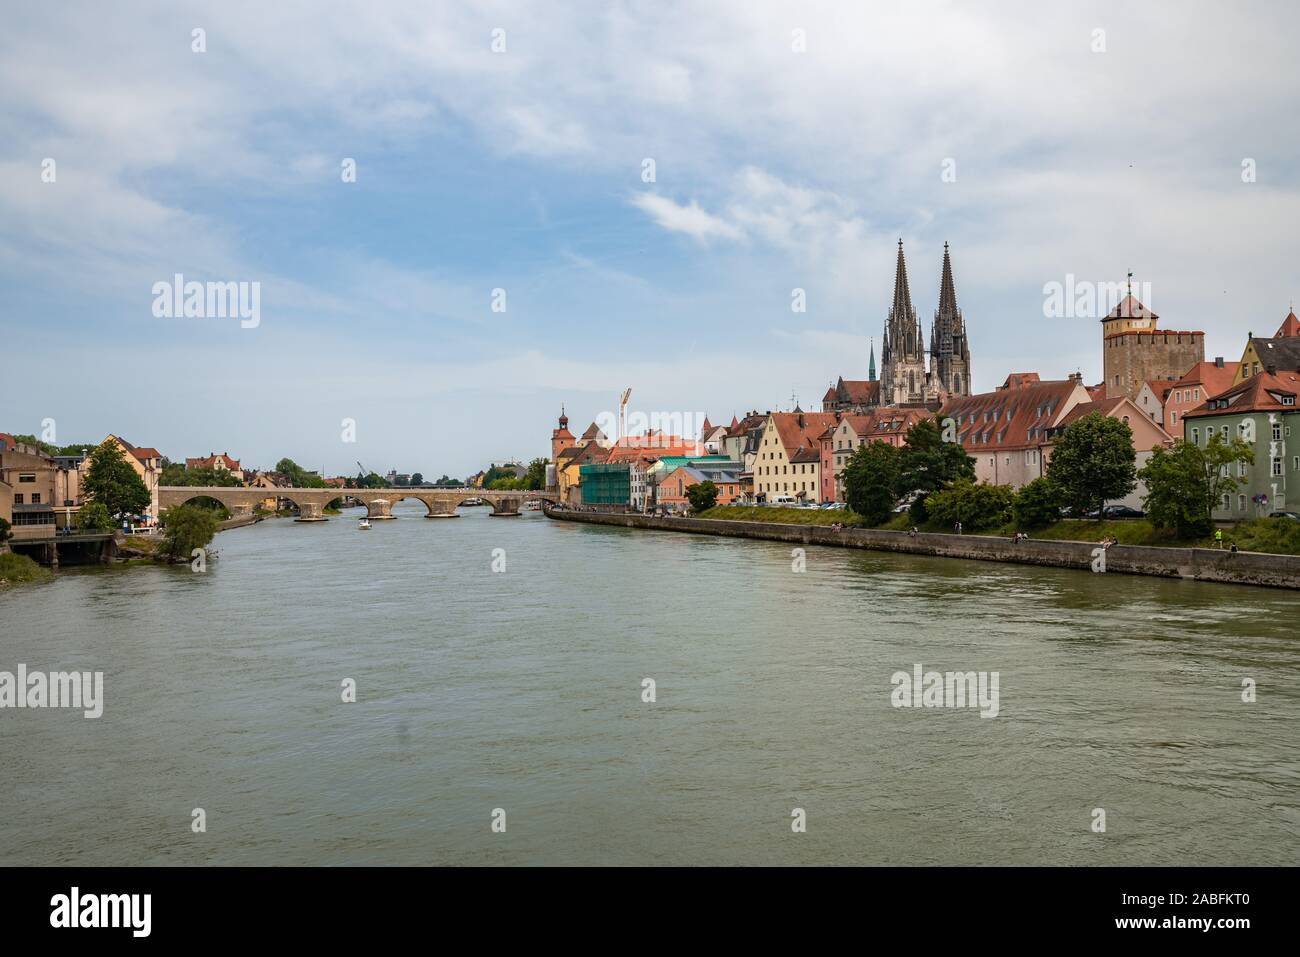 Panorama view of the stone bridge and historical old town with the St. peter cathedral of Regensburg or Ratisbon on the river side of Danube, Bavaria, Stock Photo